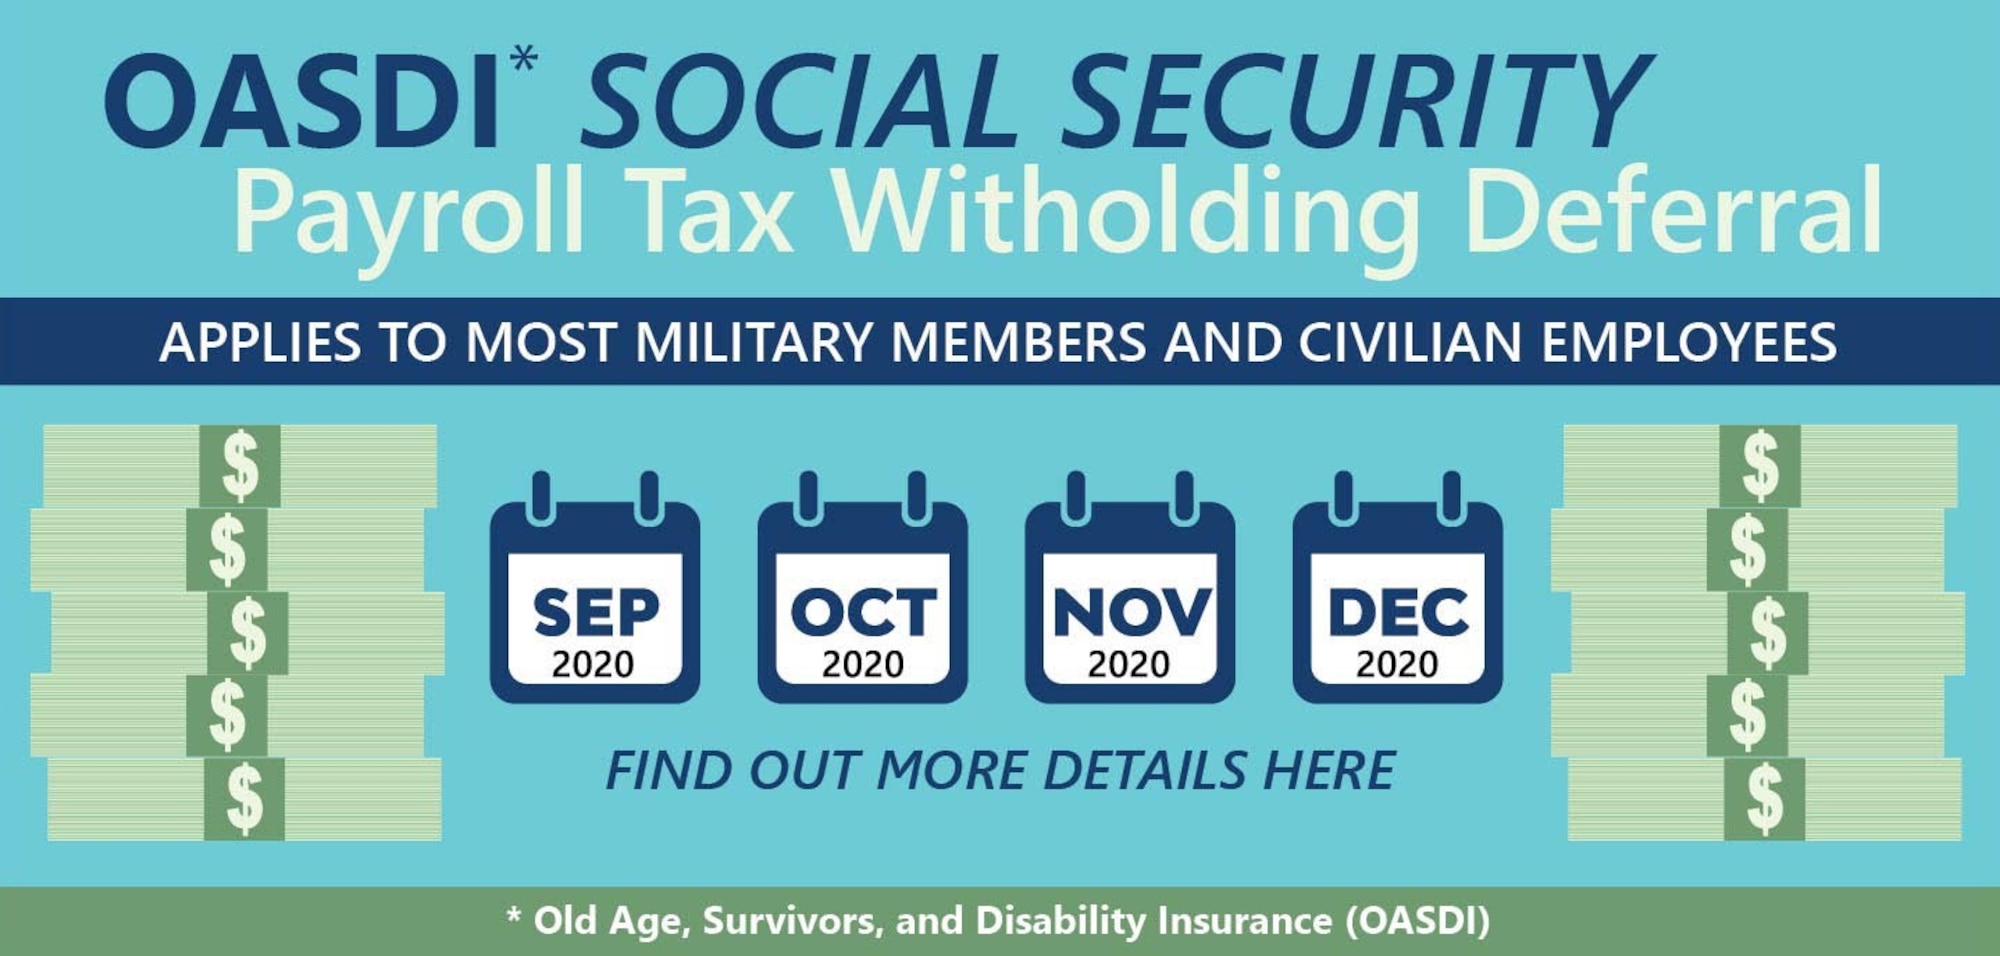 Graphic depicting military personnel and DoD civilians will see a tax break in their paychecks beginning September 2020 through the end of the calendar year.